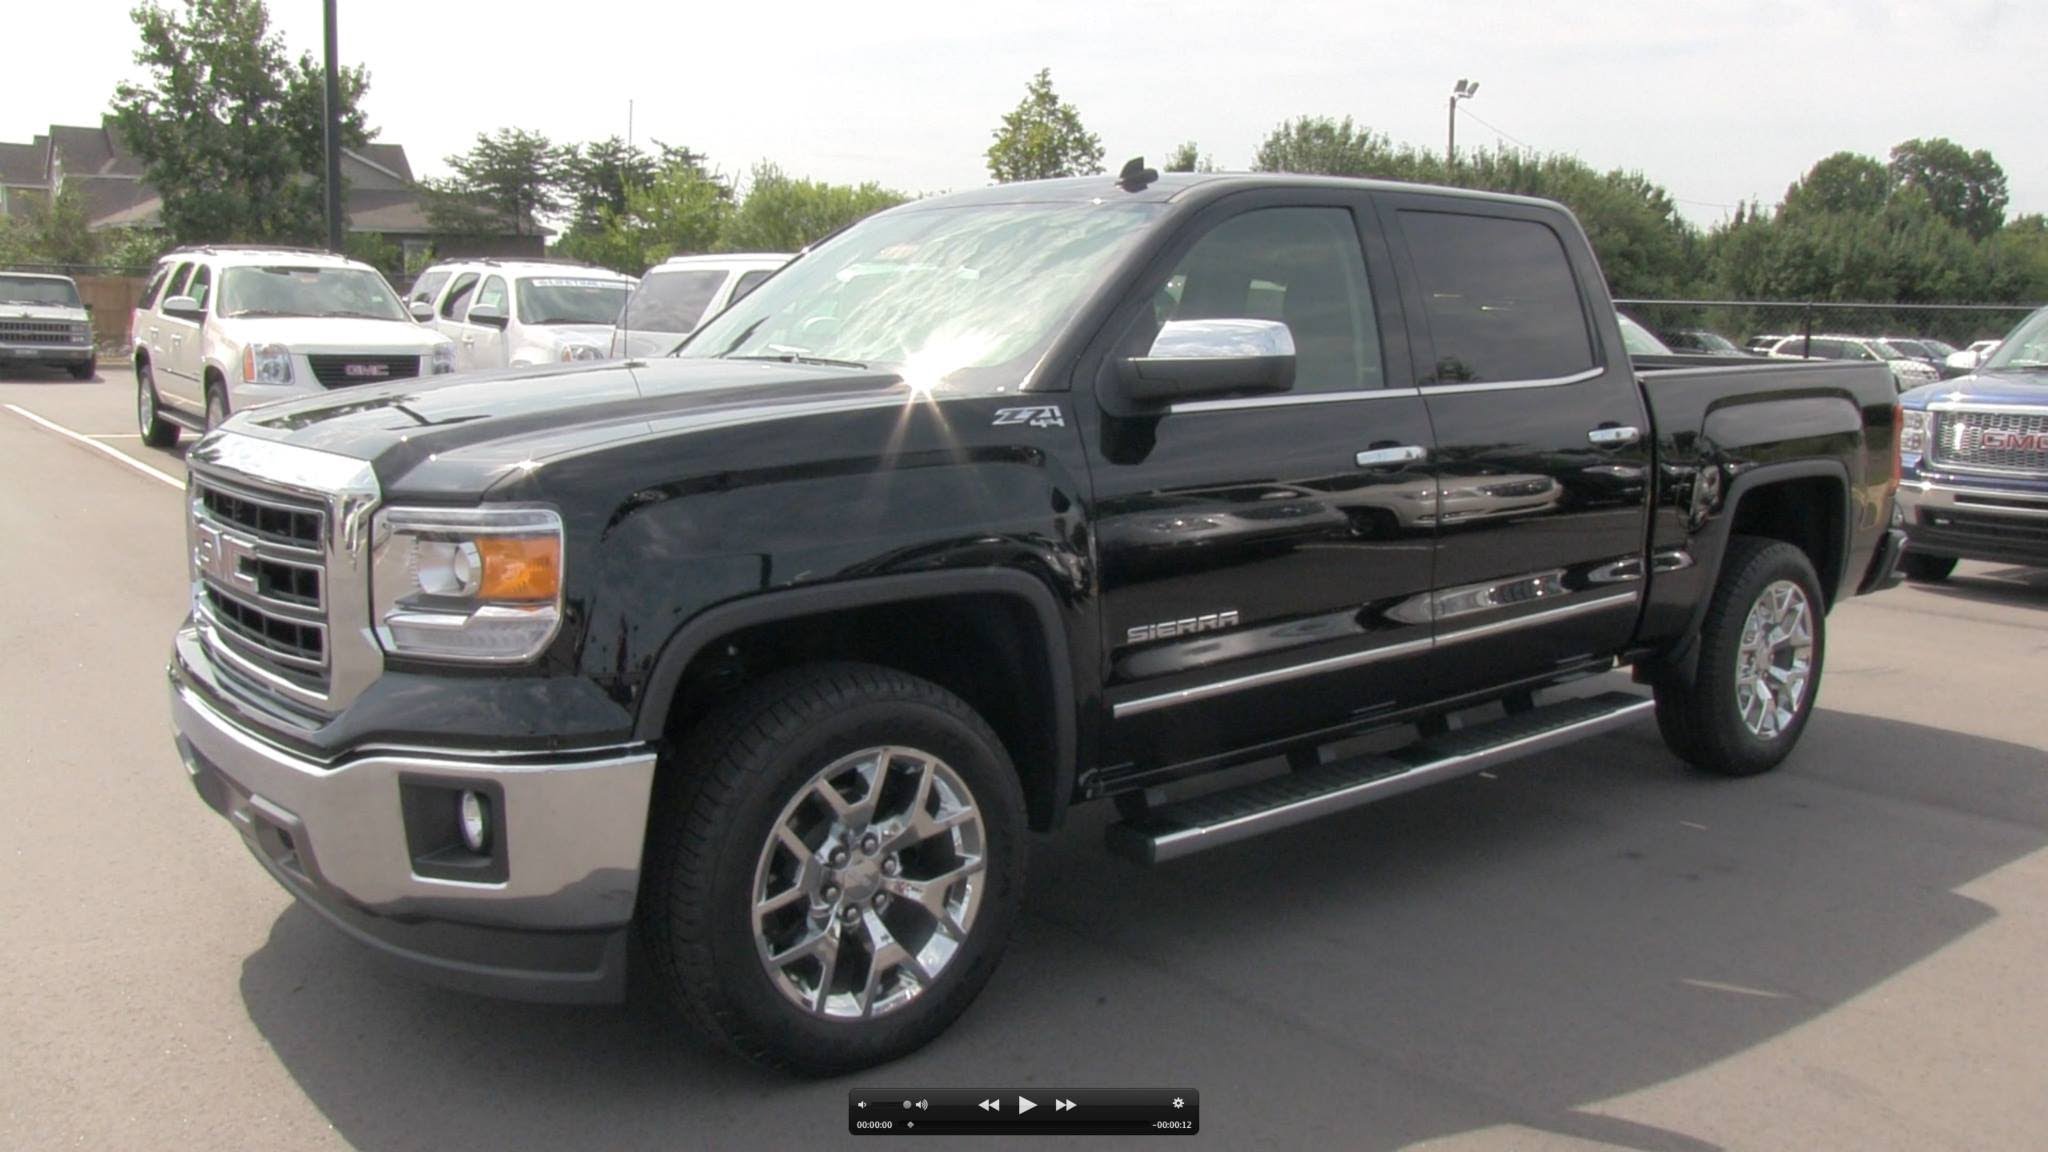 2014 GMC Sierra High Quality Background on Wallpapers Vista